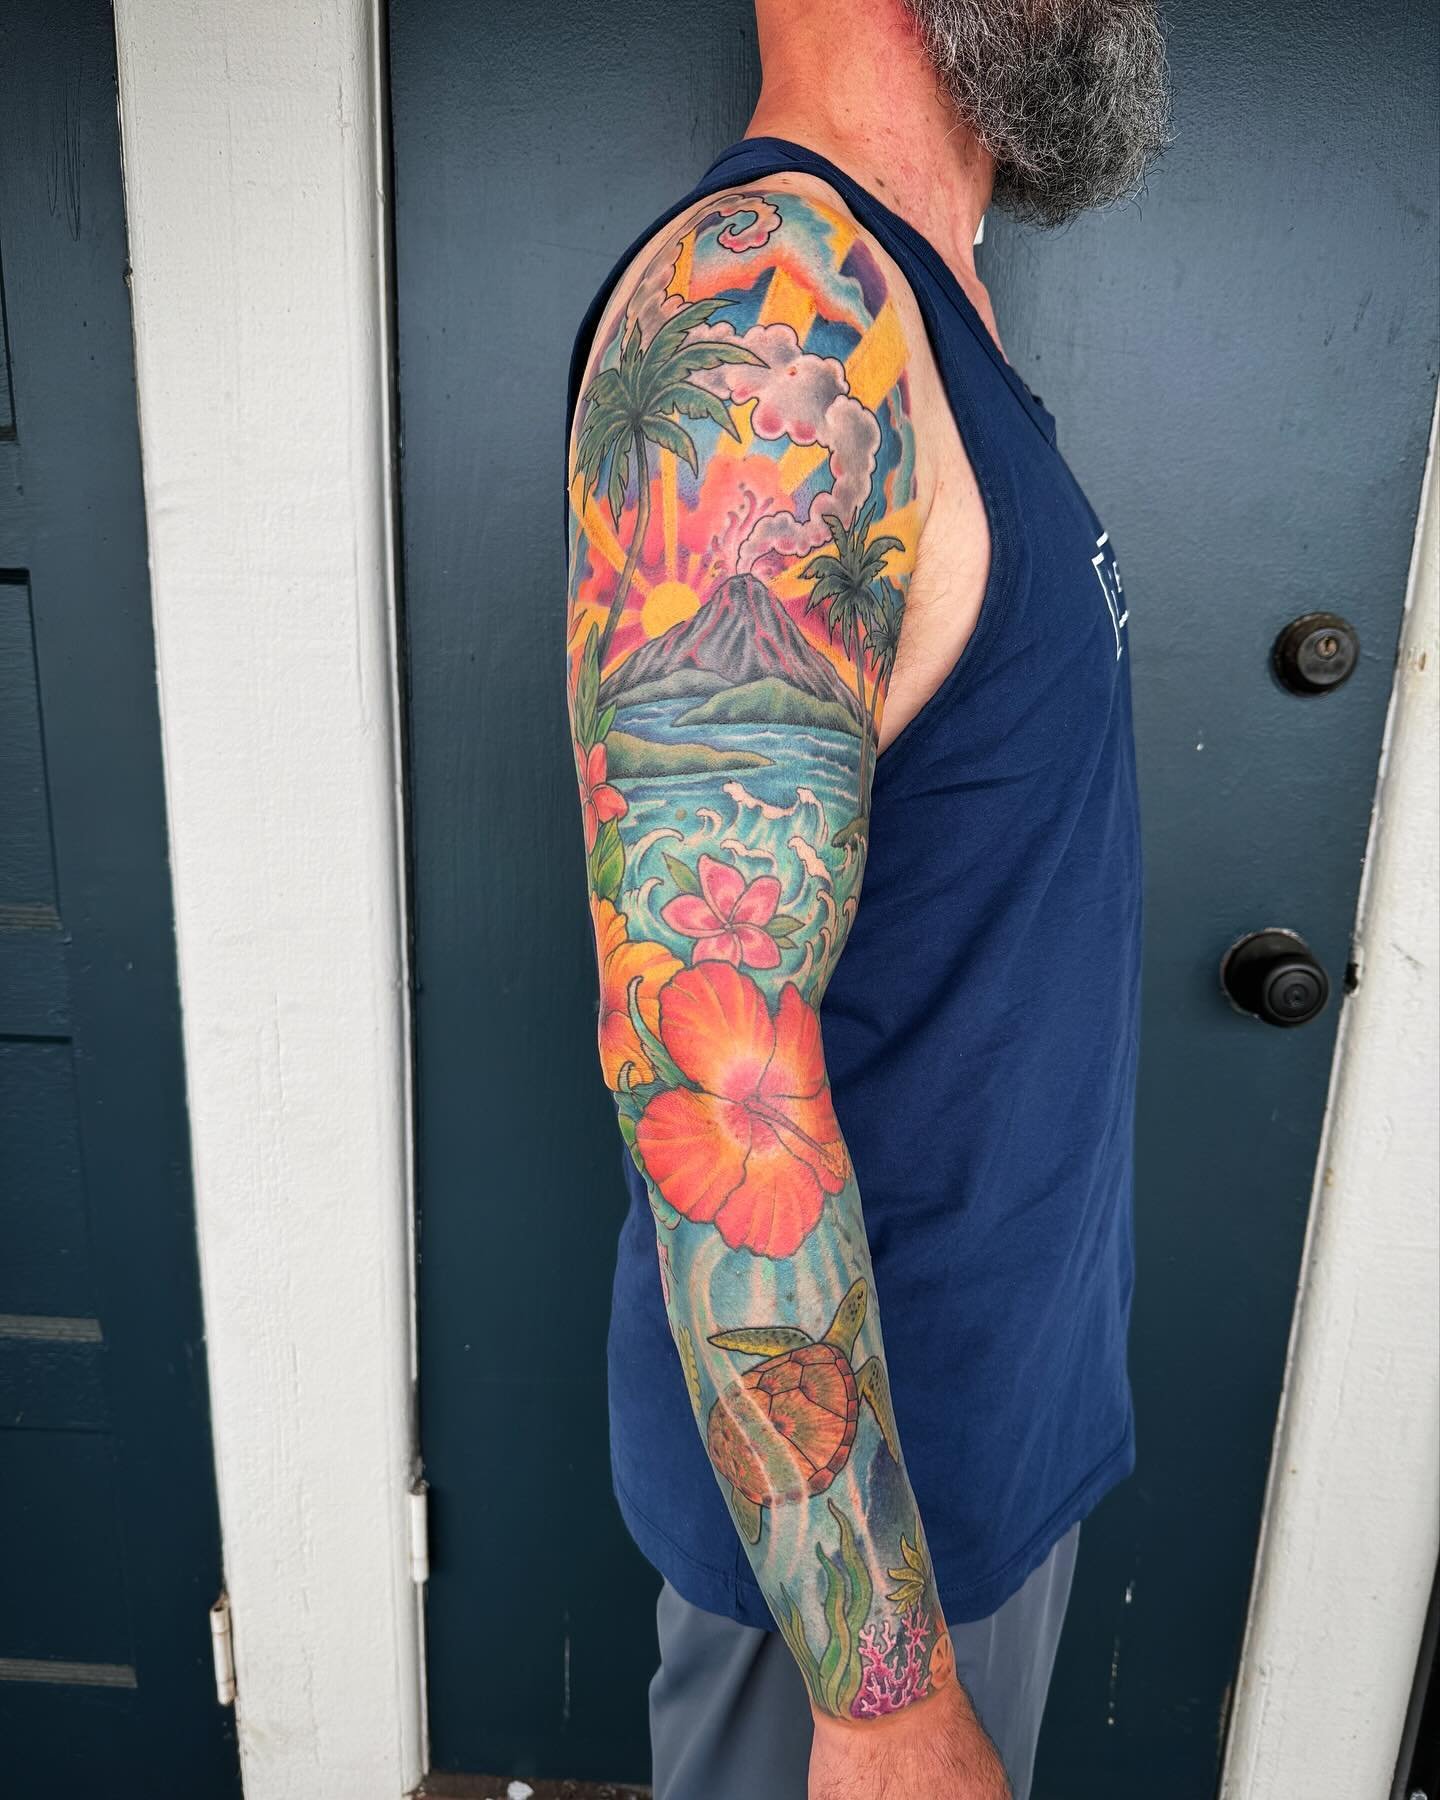 🤩 Finished up this love letter to Hawaii on Terry. Mostly fully healed. Mahalo Terry!! 🌴 by @kristinlowerytattoos 
.
.
.
#hawaiitattoo #colortattoo #hibiscus #hibiscustattoo #hawaii #bigisland #bigislandlove #hilotattoo #hawaiitattooartist #southse